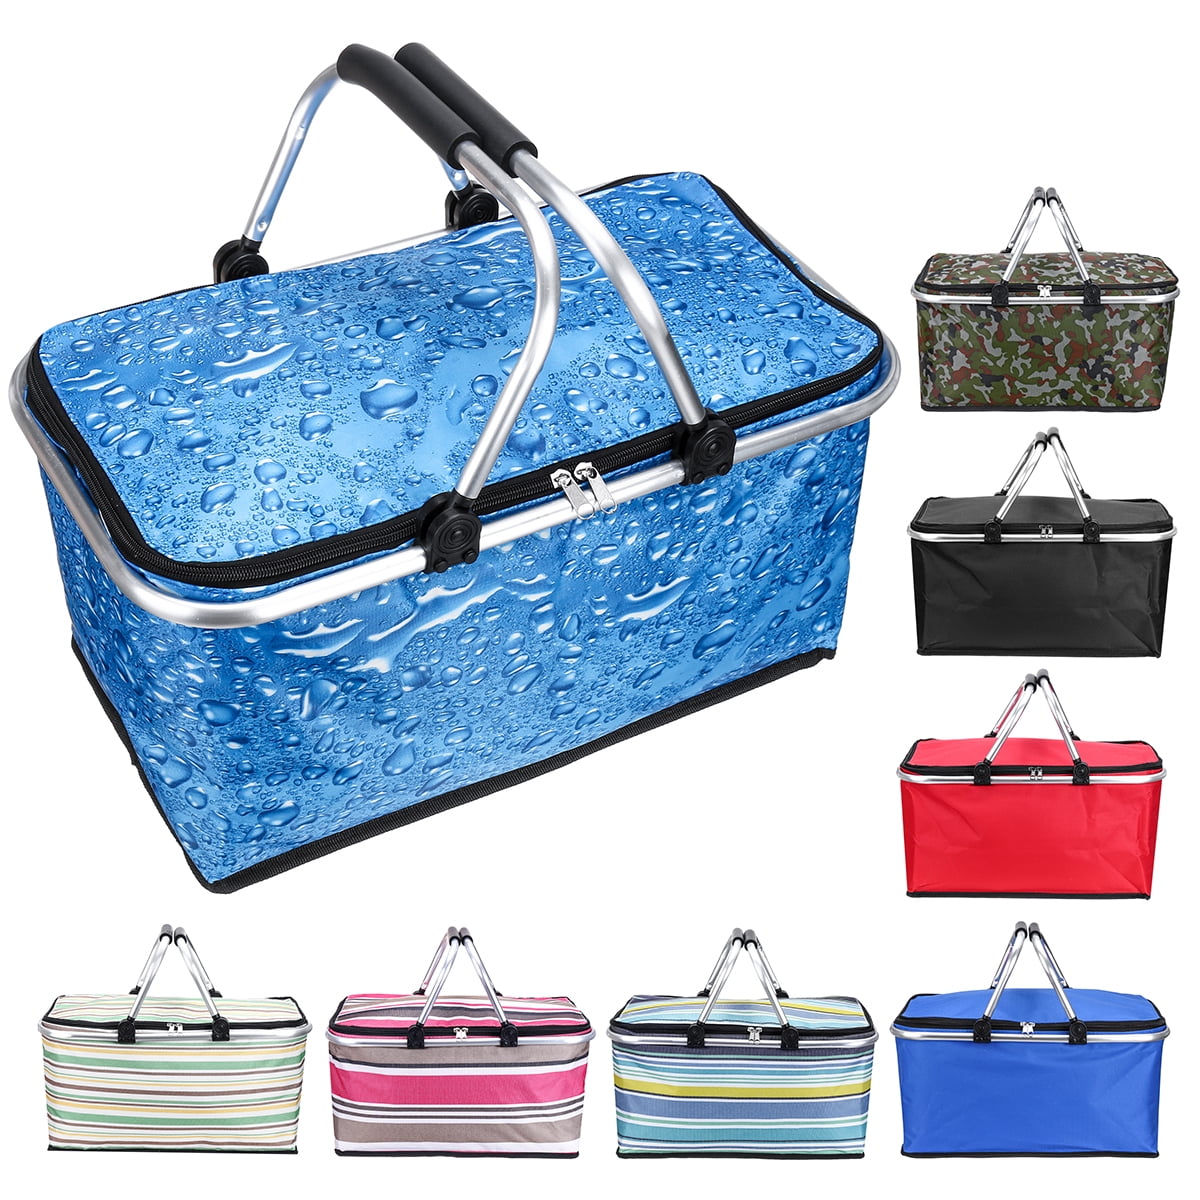 Leakproof Collapsible Portable Cooler Comes with 15 Garbage Bags Insulated Cooler Bag Picnic Basket Grocery Bag Picnic kit with Aluminium Handle for Travel Camping Shopping 